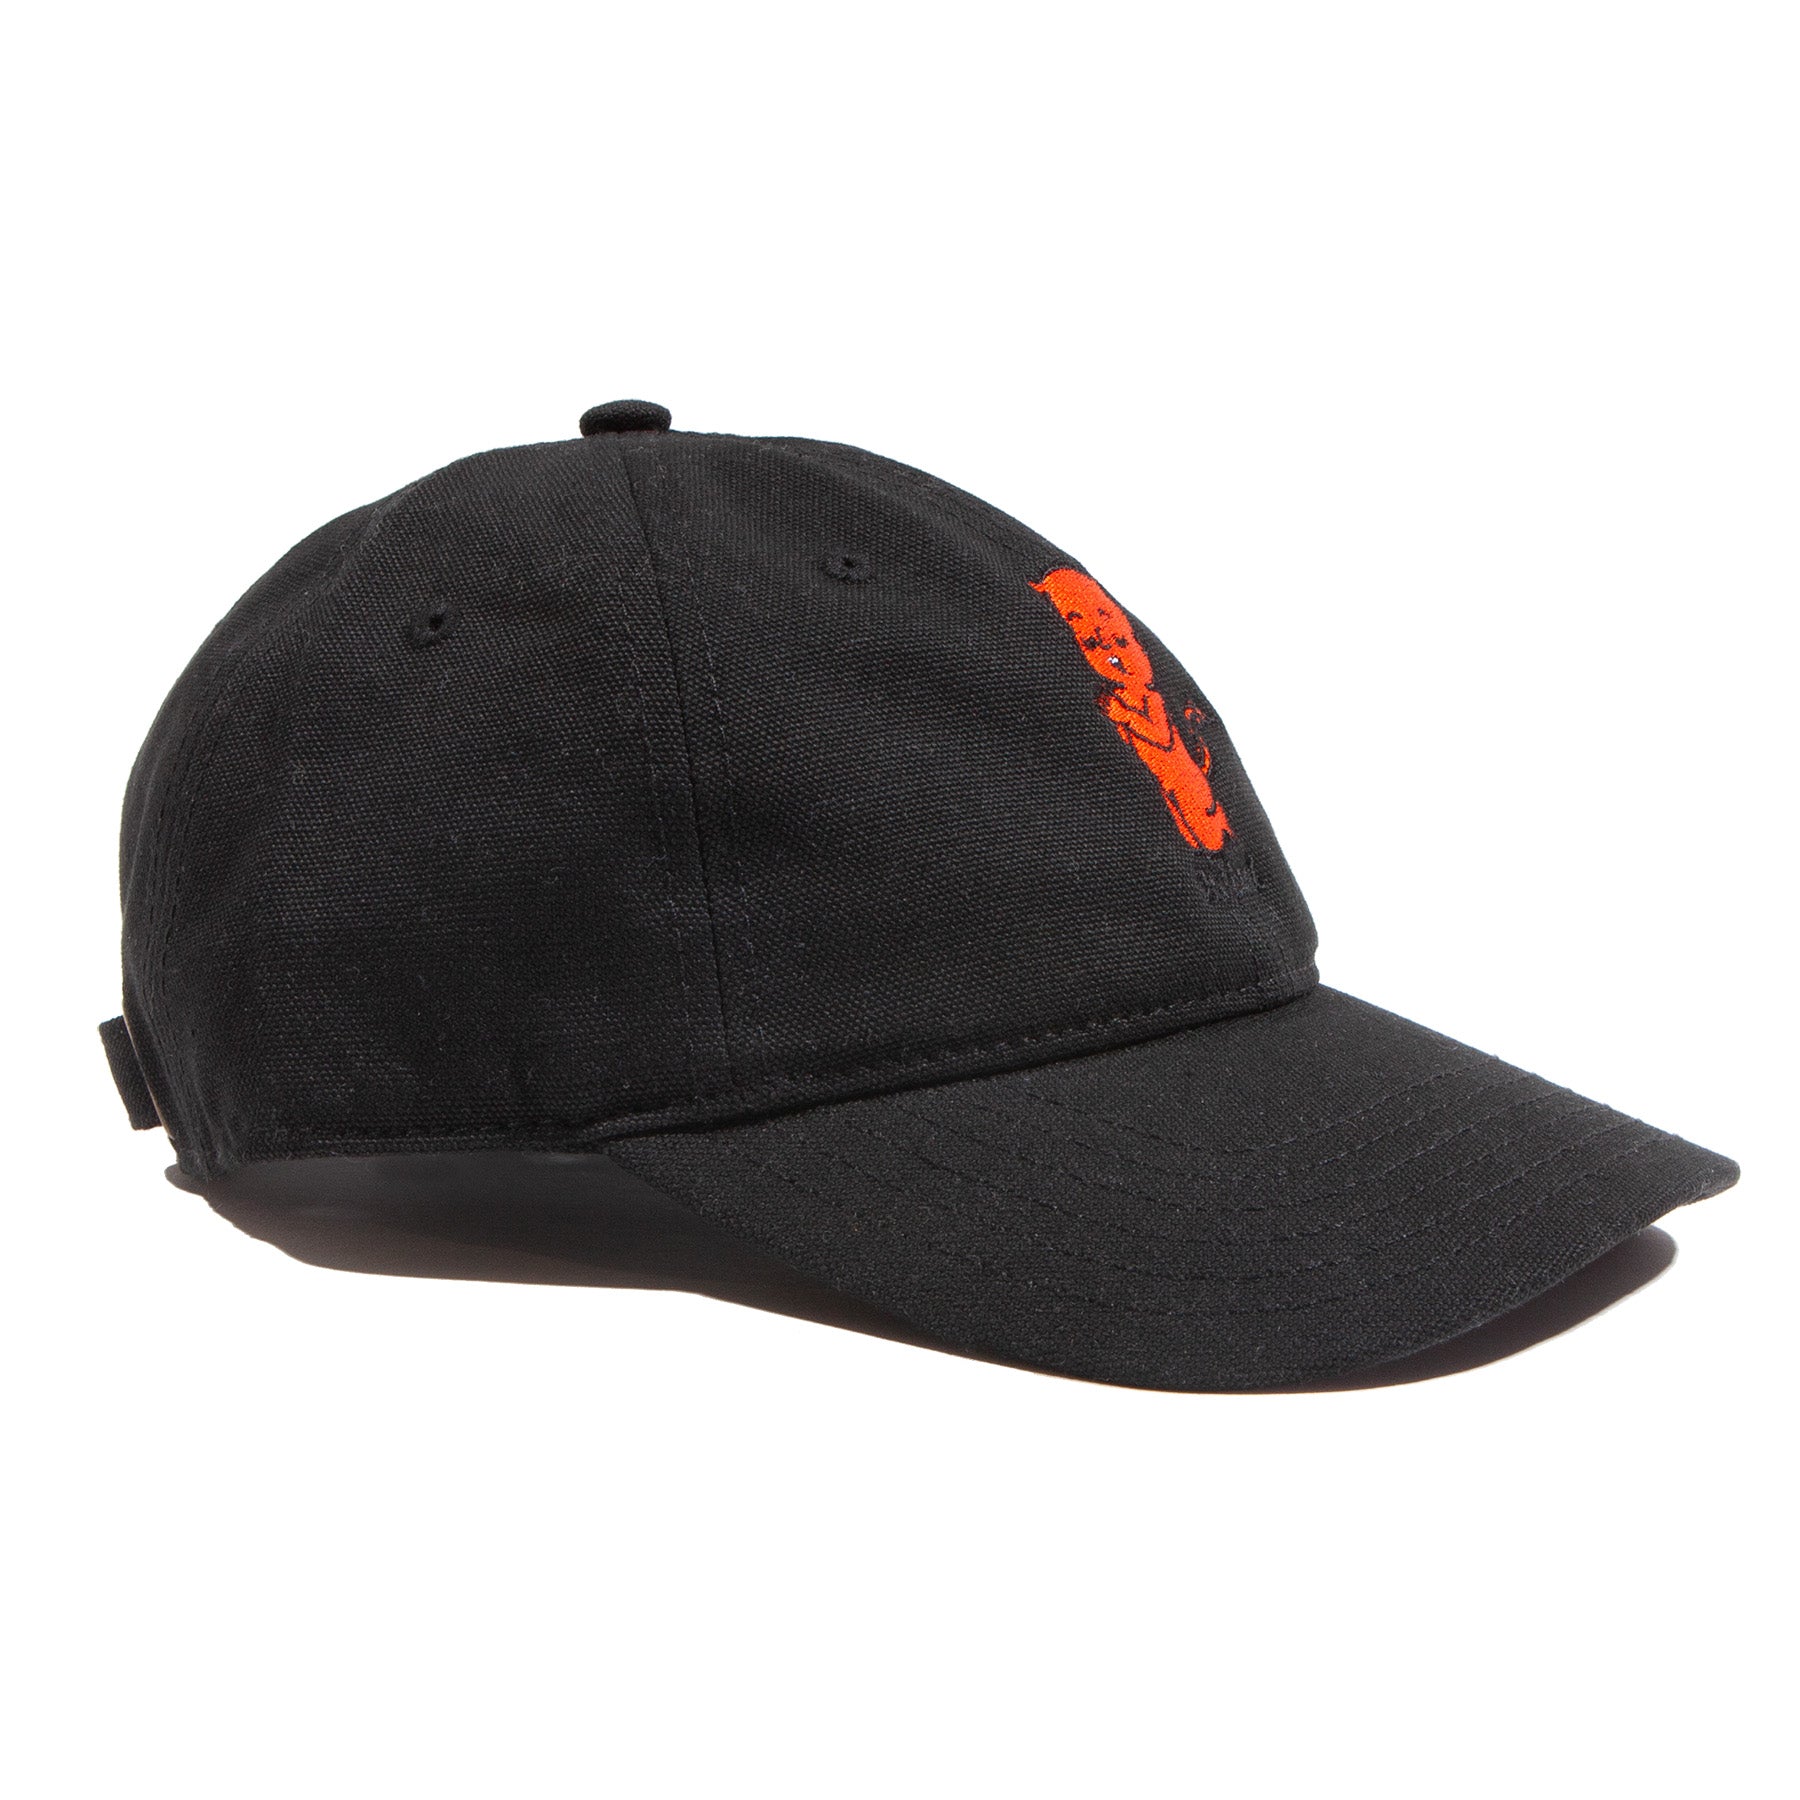 Orchard Thoughts & Prayers Dad Hat Black Canvas